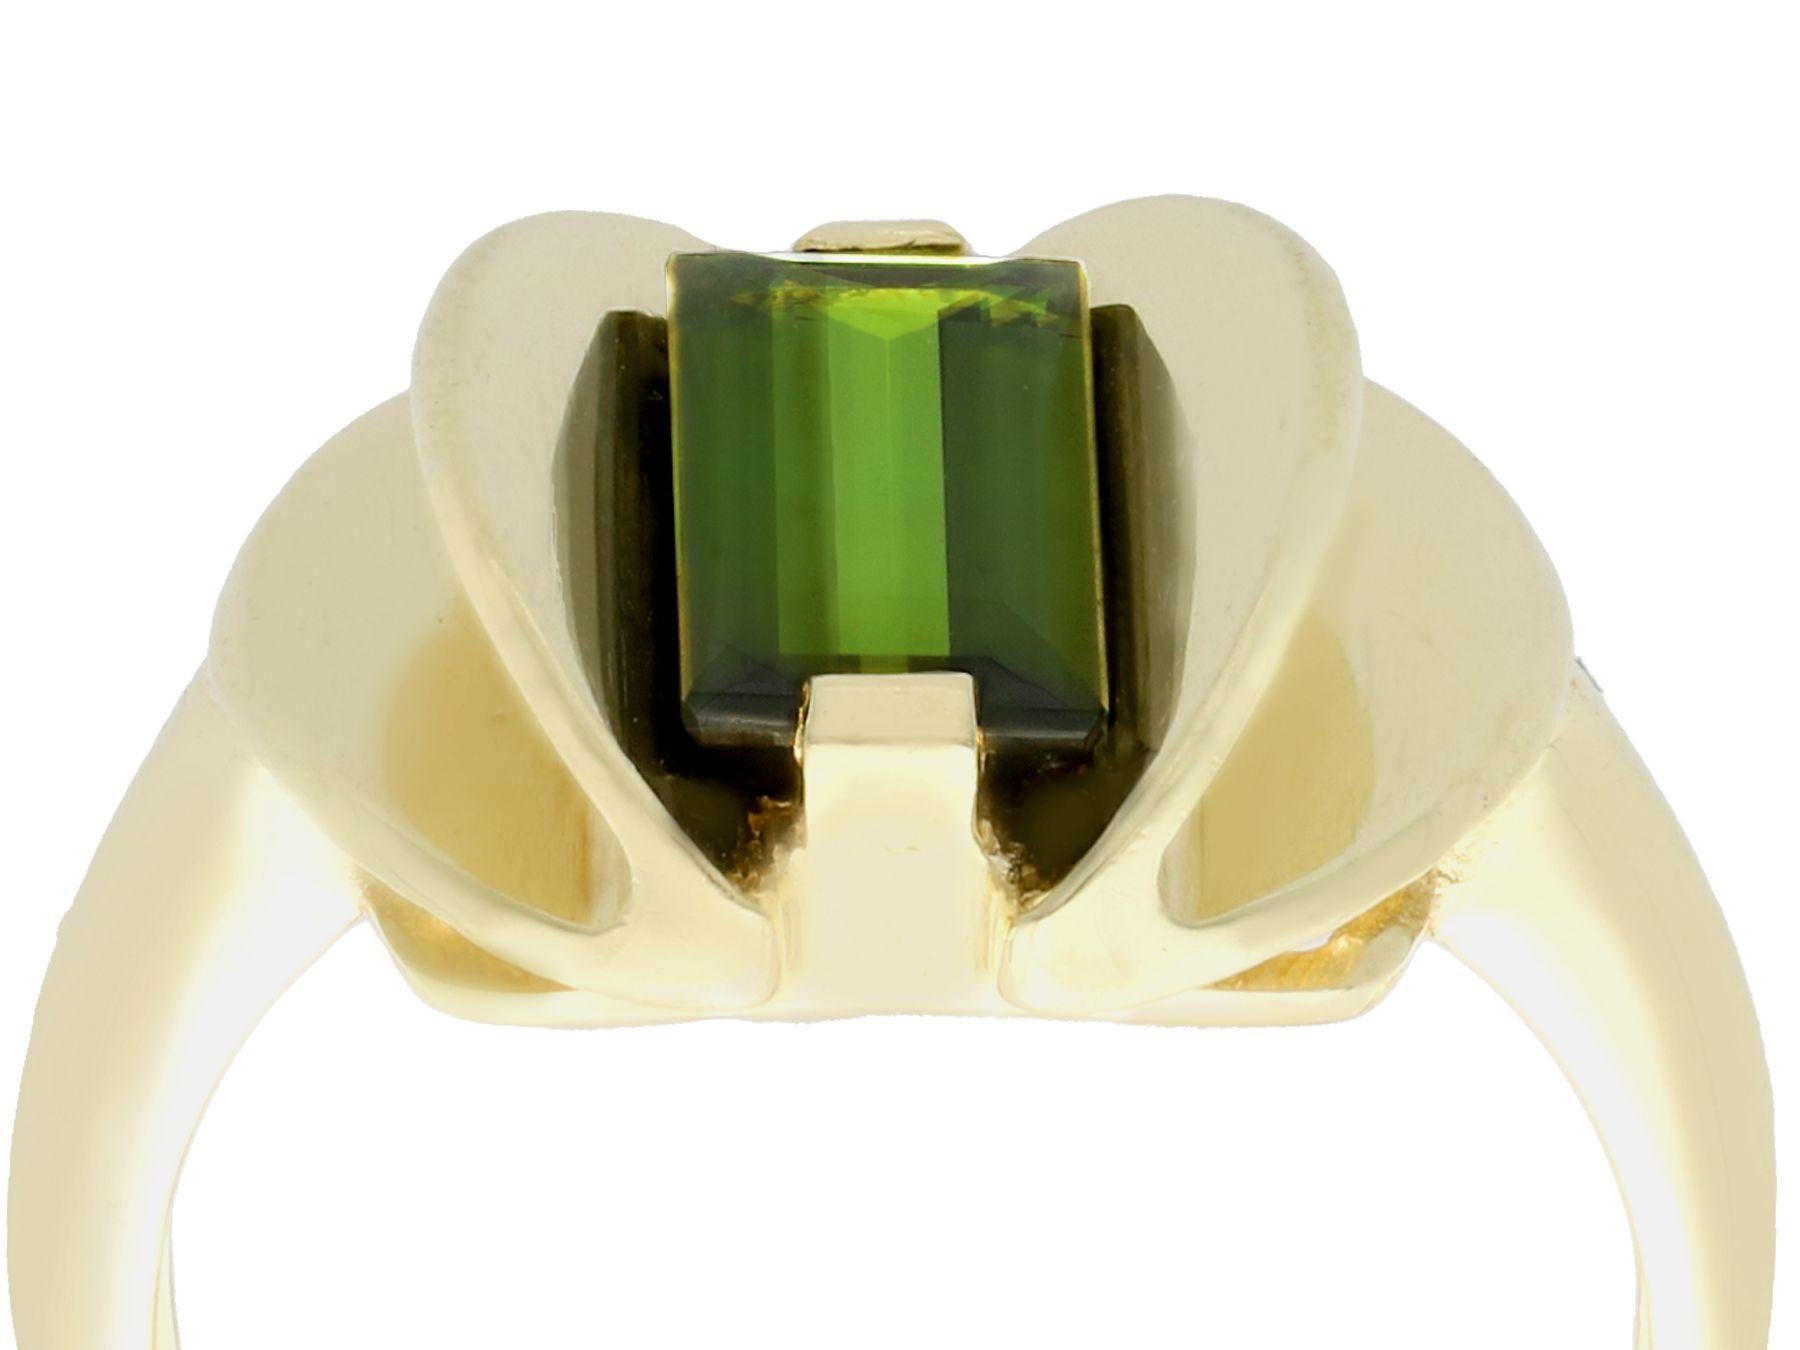 An impressive vintage Art Deco 2.05 carat green tourmaline and 14 karat yellow gold dress ring; part of our diverse gemstone jewelry collections.

This fine and impressive vintage tourmaline ring has been crafted in 14k yellow gold.

The three